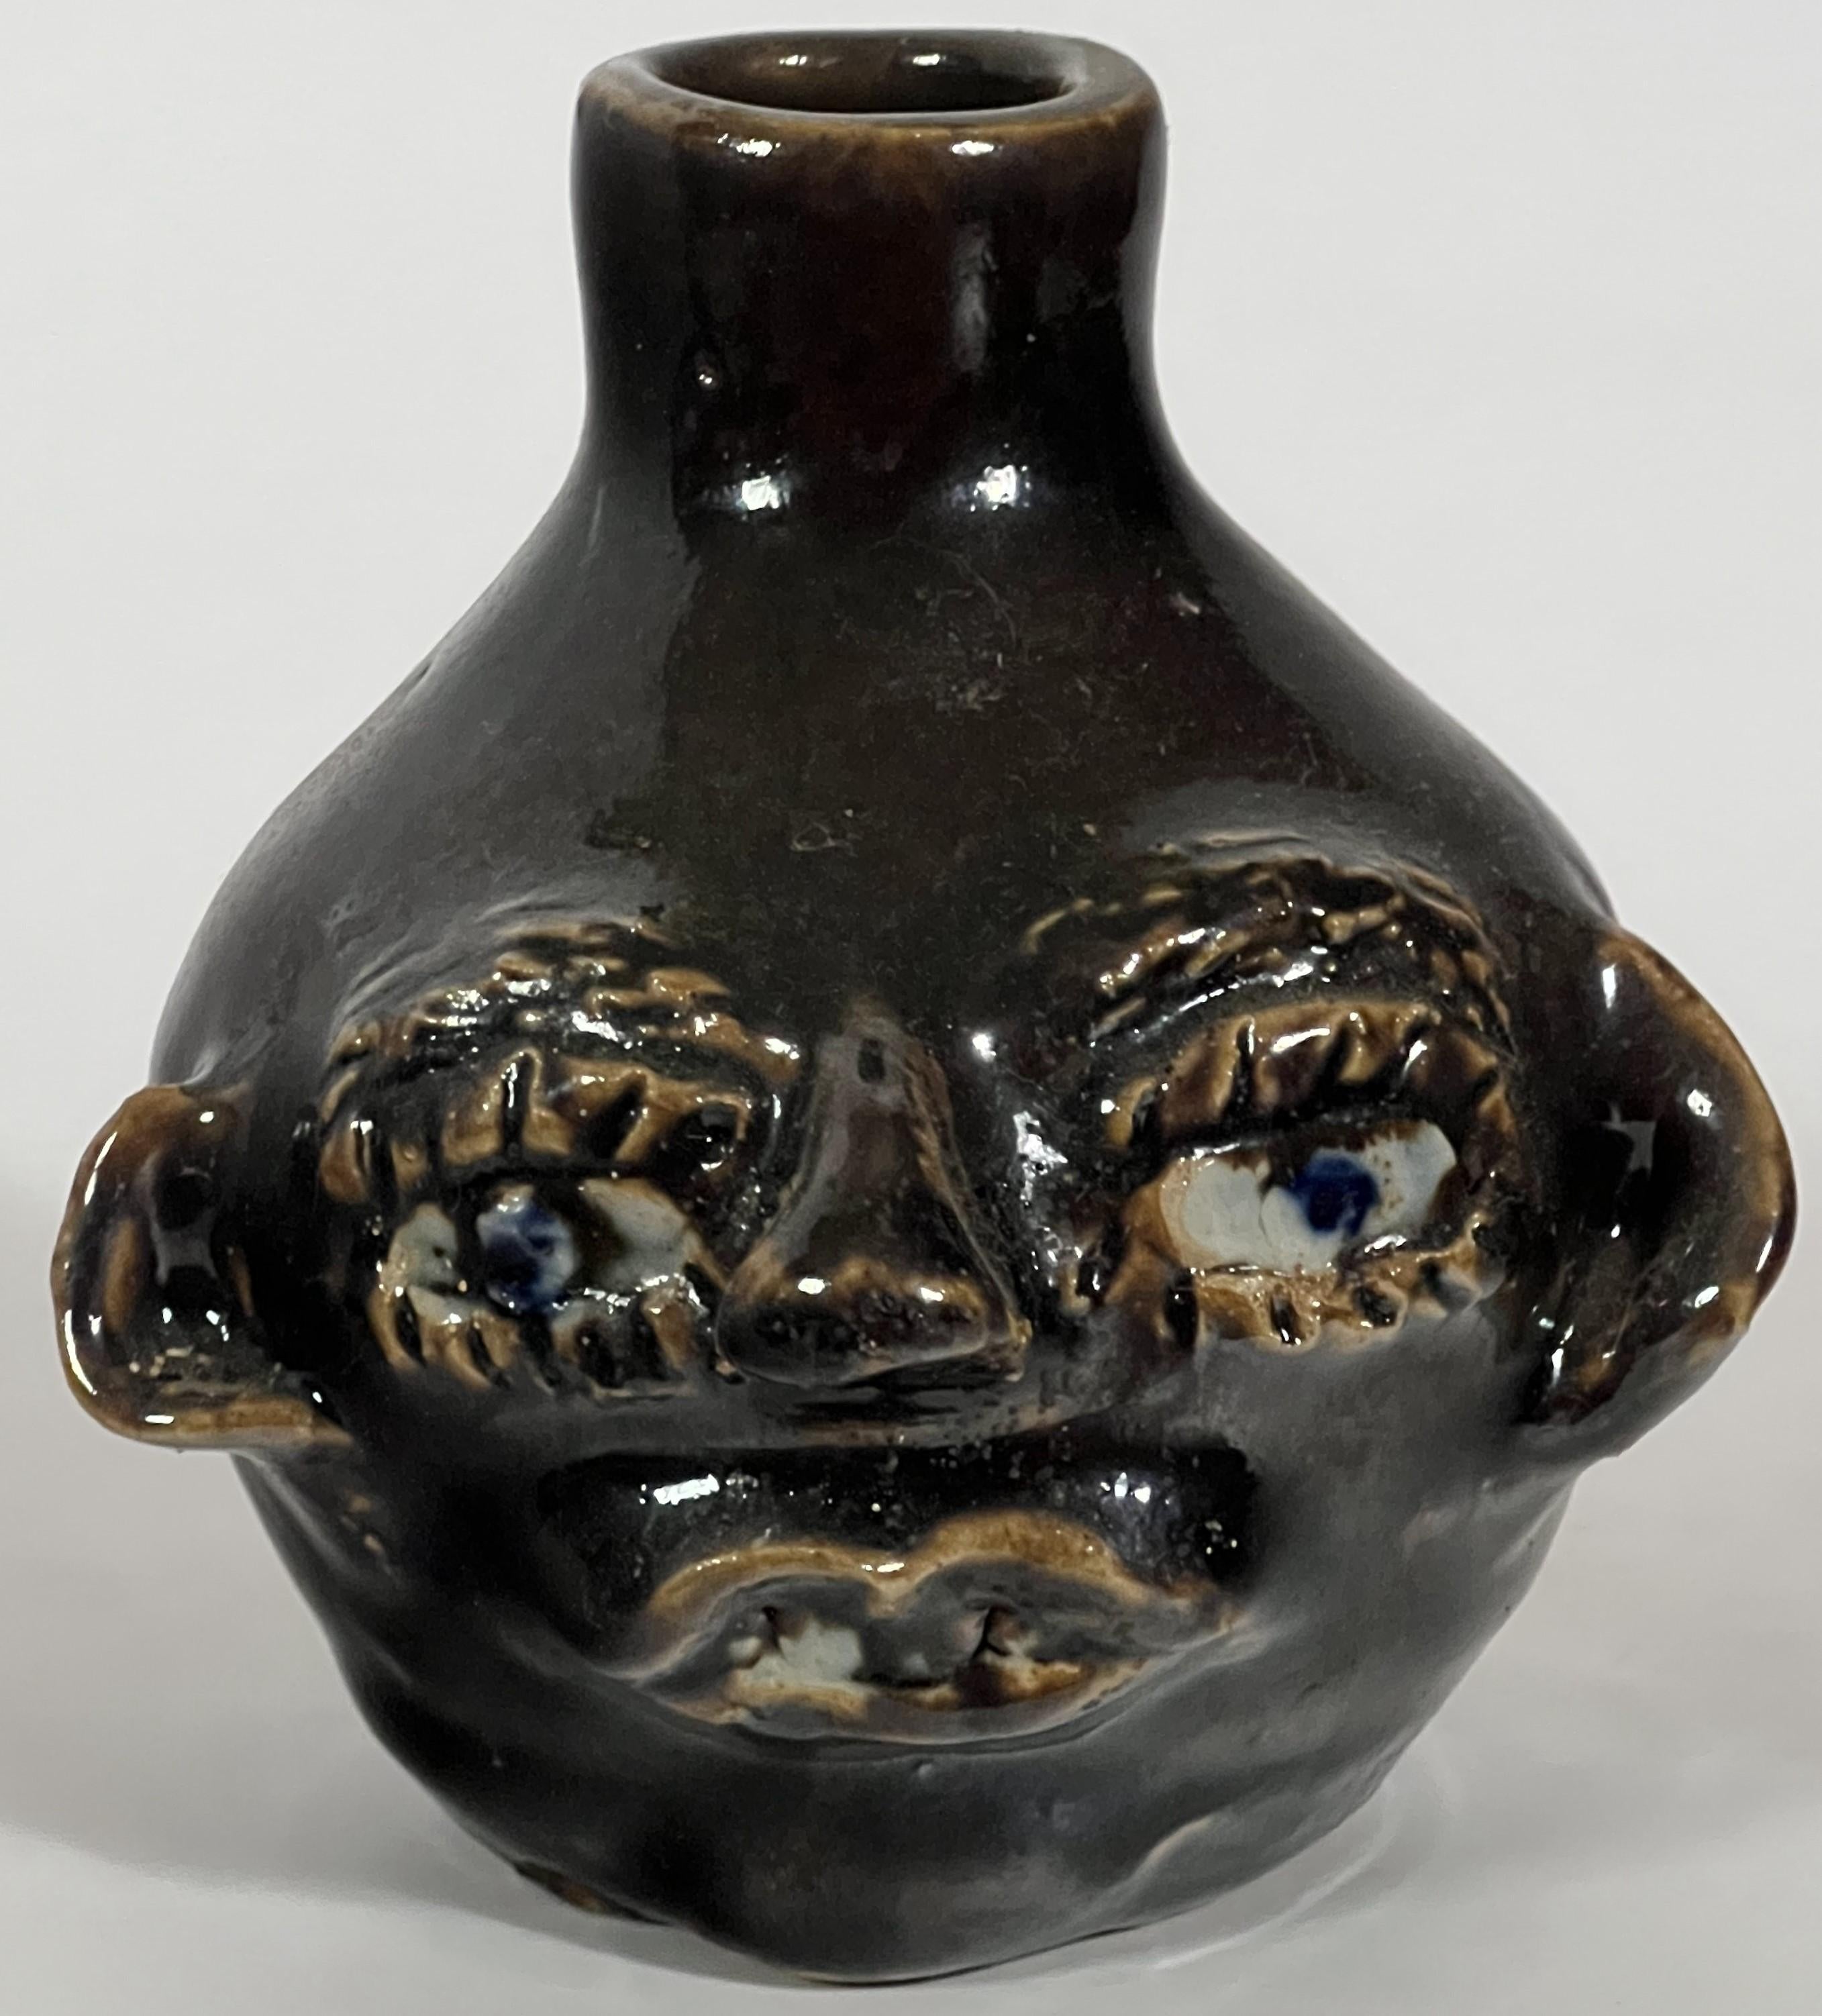 The Face Jug tradition in the Southern United States is the best known vernacular style and dates to the early 19th century.  The revival of the traditional Southern Pottery dates to the 1960's and was heavily driven by support from the Smithsonian